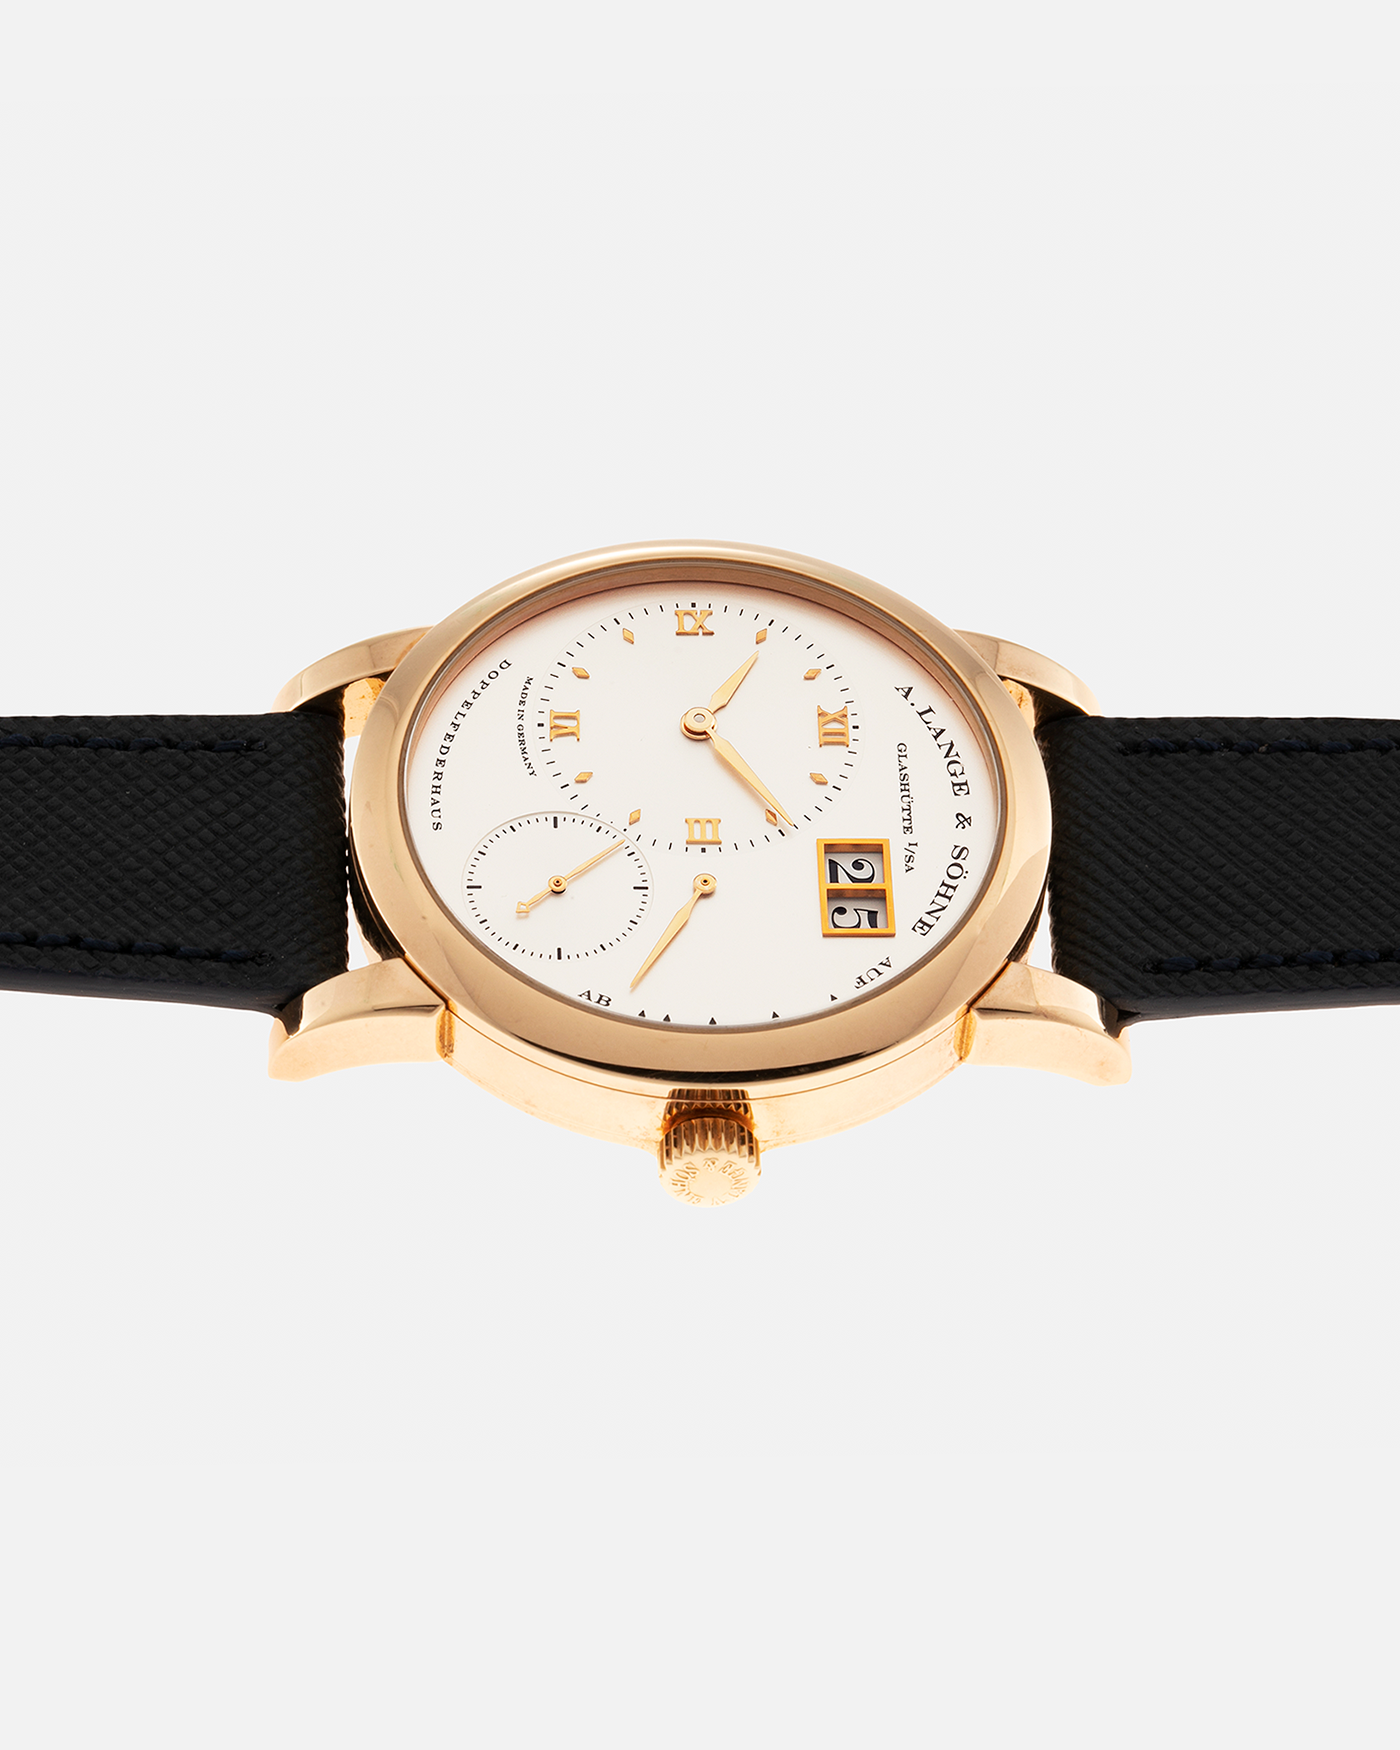 Brand: A. Lange & Sohne Year: 2000s Model: Lange 1 Reference: 101.032 Material: 18-carat Rose Gold, German Silver Movement: A. Lange & Söhne Cal. L901.0, Manual-Winding Case Diameter: 38.5mm Lug Width: 20mm Strap: Molequin Navy Blue Textured Calf Leather Strap with Signed 18-carat Rose Gold Tang Buckle, with additional A. Lange & Söhne Black Alligator Leather Strap (Used)